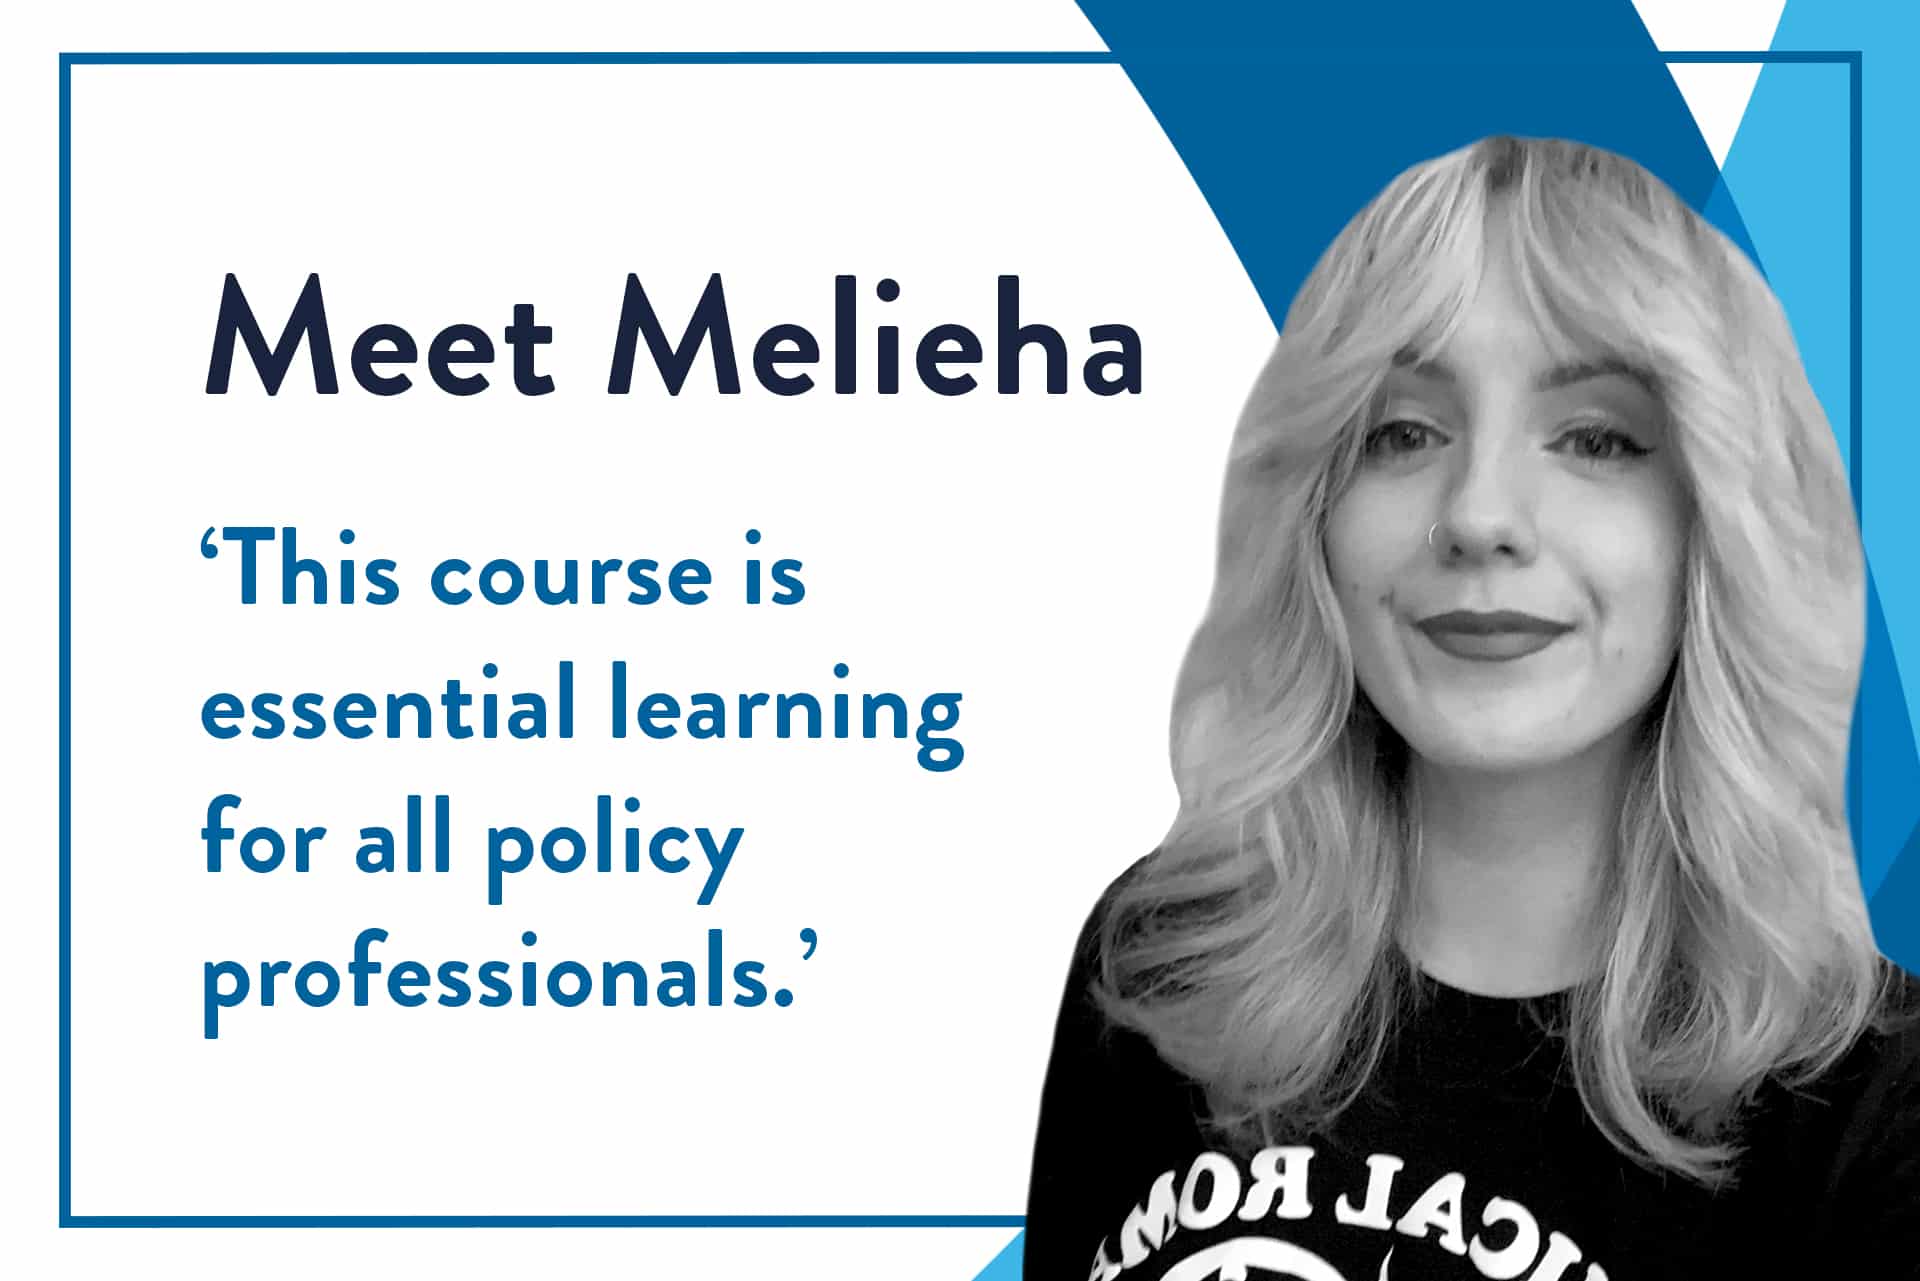 Blog header displaying Evidence in Public Policy student Melieha and a quote from her testimonial